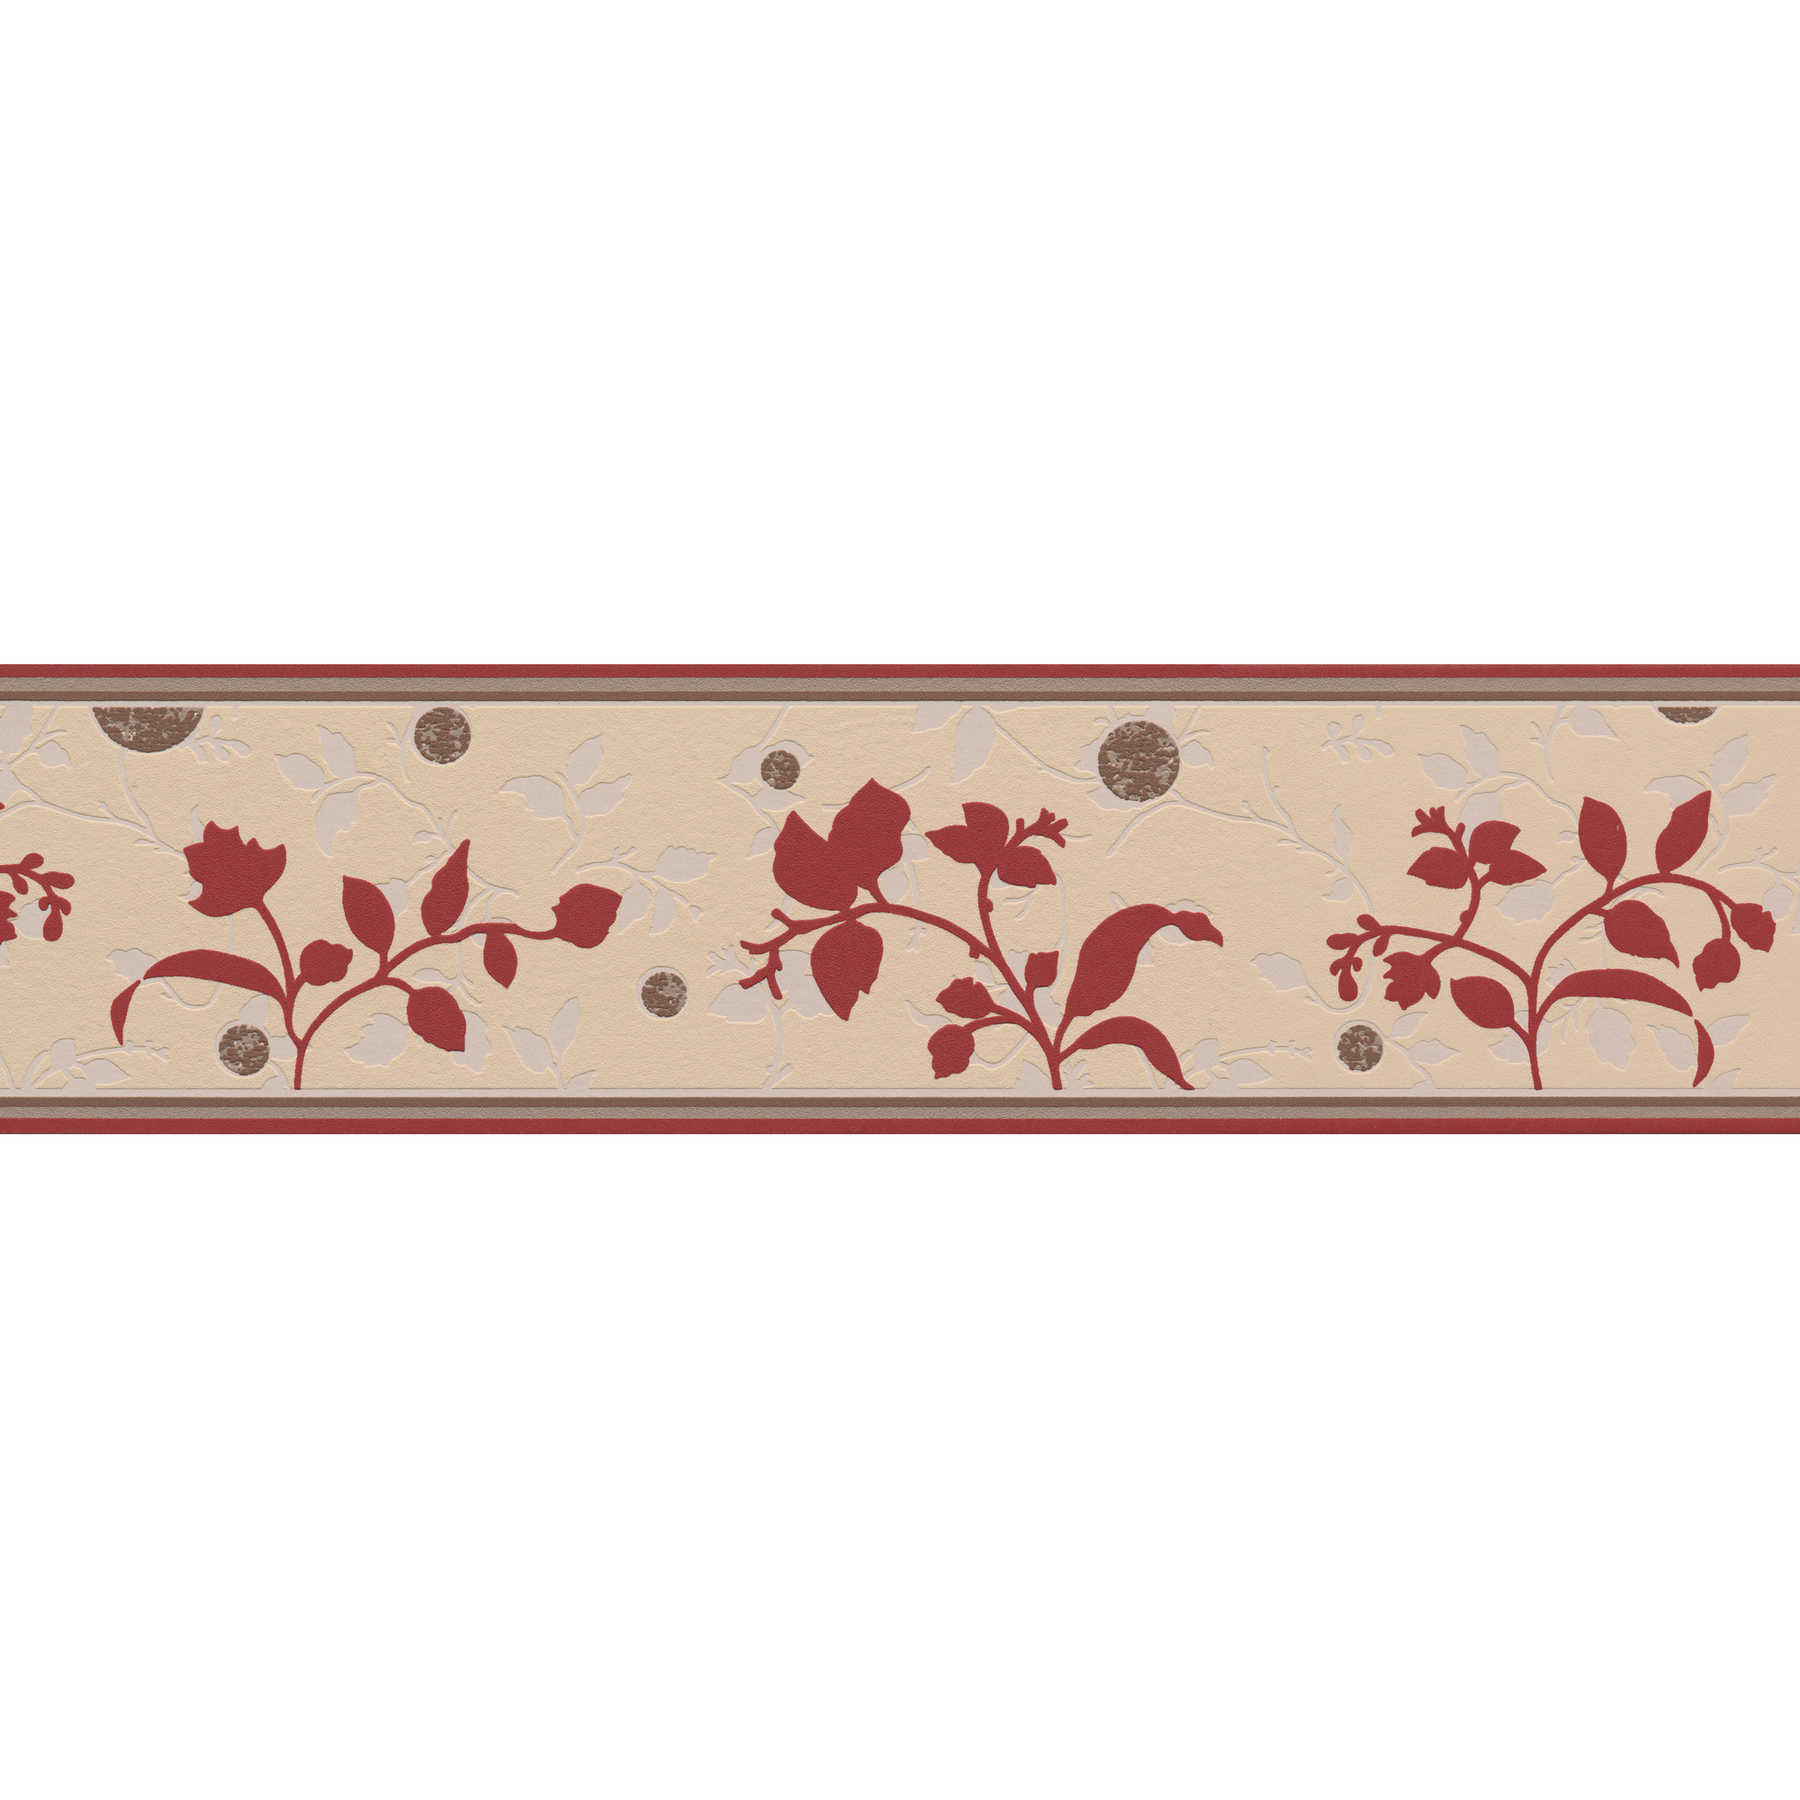         Border leaf pattern, dots and red accents- Red, Brown, Beige
    